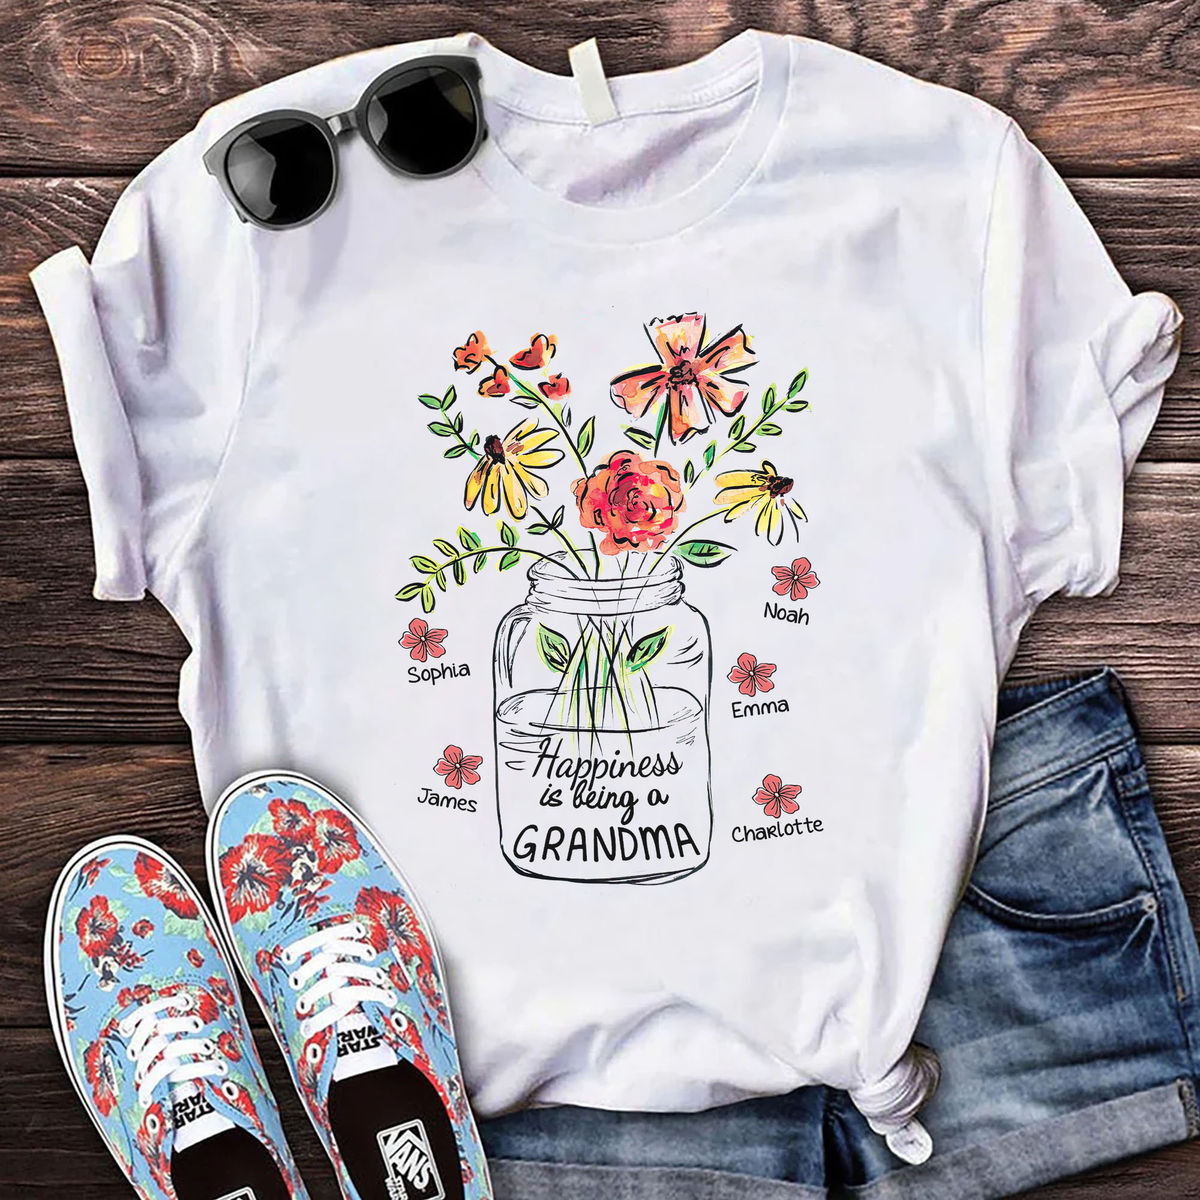 Personalized Shirt - Family - Love Flower - A Gift That Makes Them Smile - Up to 29 kids_3